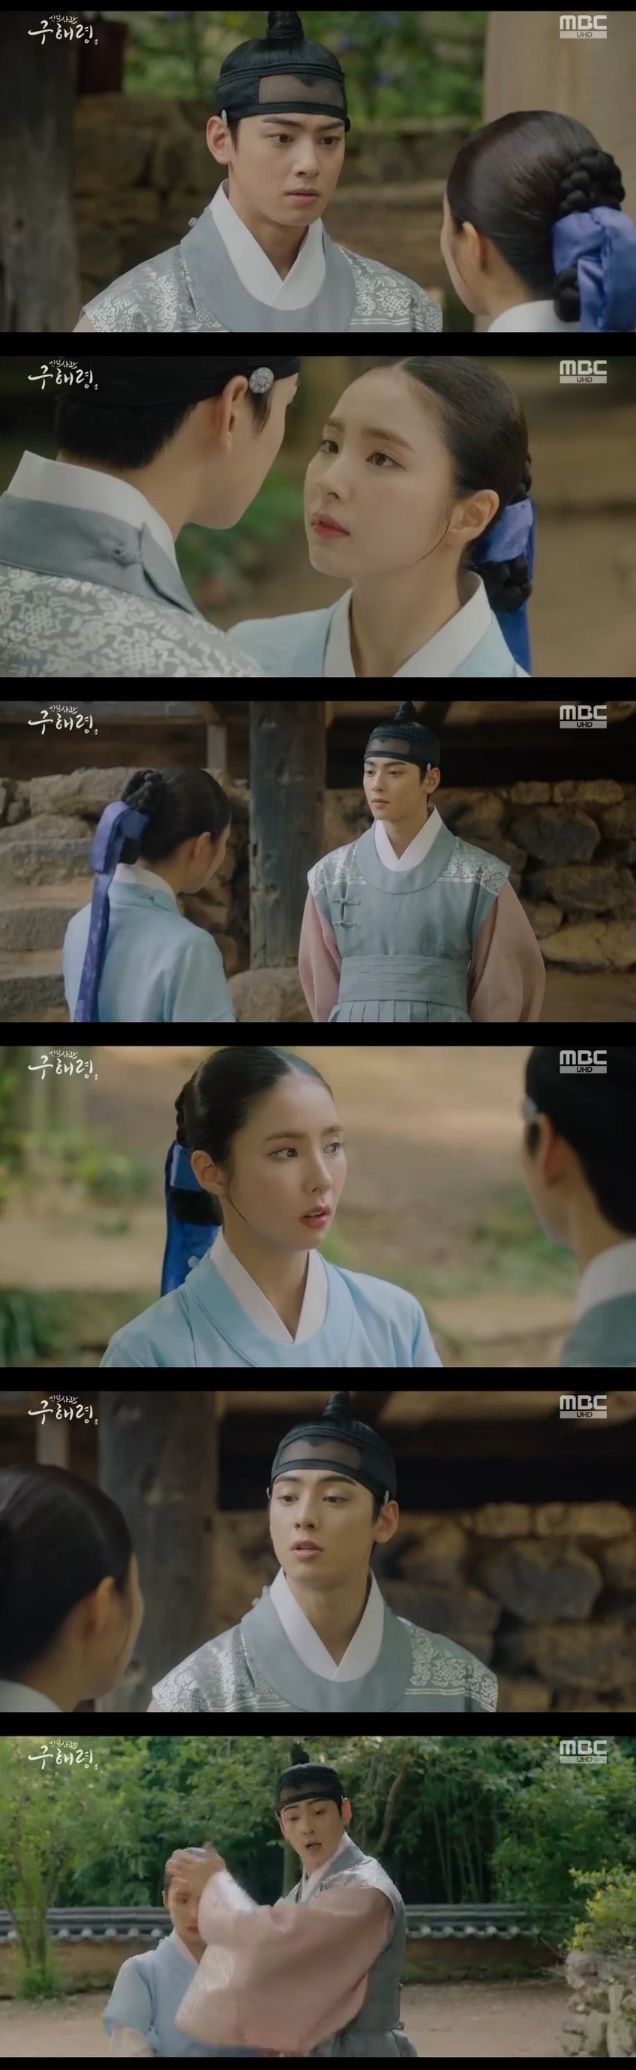 Seoul =) = New officer Rookie Historian Goo Hae-ryung Cha Eun-woo straightened to Shin Se-kyung.In the MBC drama The New Entrepreneur Rookie Historian Goo Hae-ryung broadcasted on the afternoon of the 28th, Dowon Daegun Yirim (Cha Eun-woo) completely lost her heart to the active kiss of Mrs. Rookie Historian Goo Hae-ryung (Shin Se-kyung).All Irim thought was Rookie Historian Goo Hae-ryung.To Rookie Historian Goo Hae-ryung, who appeared at this time, he said, I do not think I should be in a room with you.Rookie Historian Goo Hae-ryung then gave Irim another surprise kiss: Be familiar, this is what it is, capturing Irims heart.Irim jokes, I think I need to do more to get familiar.Lee then approached Rookie Historian Goo Hae-ryung more actively, saying, What do you mean to do good?With a sudden foreigner hiding in the rusty hall, Rookie Historian Goo Hae-ryung worried about the rain.Rookie Historian Goo Hae-ryung said: Mama believes all that he says, something is a little strange.Kim Seo-bang, a new bookstore, is not a person who goes to the Qing Dynasty and buys it.I dont know because youre not hit. He tried to sell me out.Rookie Historian Goo Hae-ryung then said: Its also heartbreaking to be fluent in our language, how can we speak our language?It will be really difficult for foreigners to say that Korean language is a foreigner. I think he studied Korean. I do not want to be too relieved, so let him go if the wolf is quiet, he said.I cant keep it for any time, he added.Rookie Historian Goo Hae-ryung was serious, but Irim showed a bright smile.To Rookie Historian Goo Hae-ryung, who wondered, Why are you laughing? he said, Just.Youre worried about me. What do you mean, youre good, he said. Ive even made people who have surprise confessions.At this time, foreigners appeared in front of two people.Surprised by the way he lowered his pants and urinated, Lee laughed at Rookie Historian Goo Hae-ryungs eyes.Irim and Rookie Historian Goo Hae-ryungs Alcondalkong rust party romance is adding to the fun of watching.New cadet Rookie Historian Goo Hae-ryung is broadcast every Wednesday and Thursday at 8:55 pm.